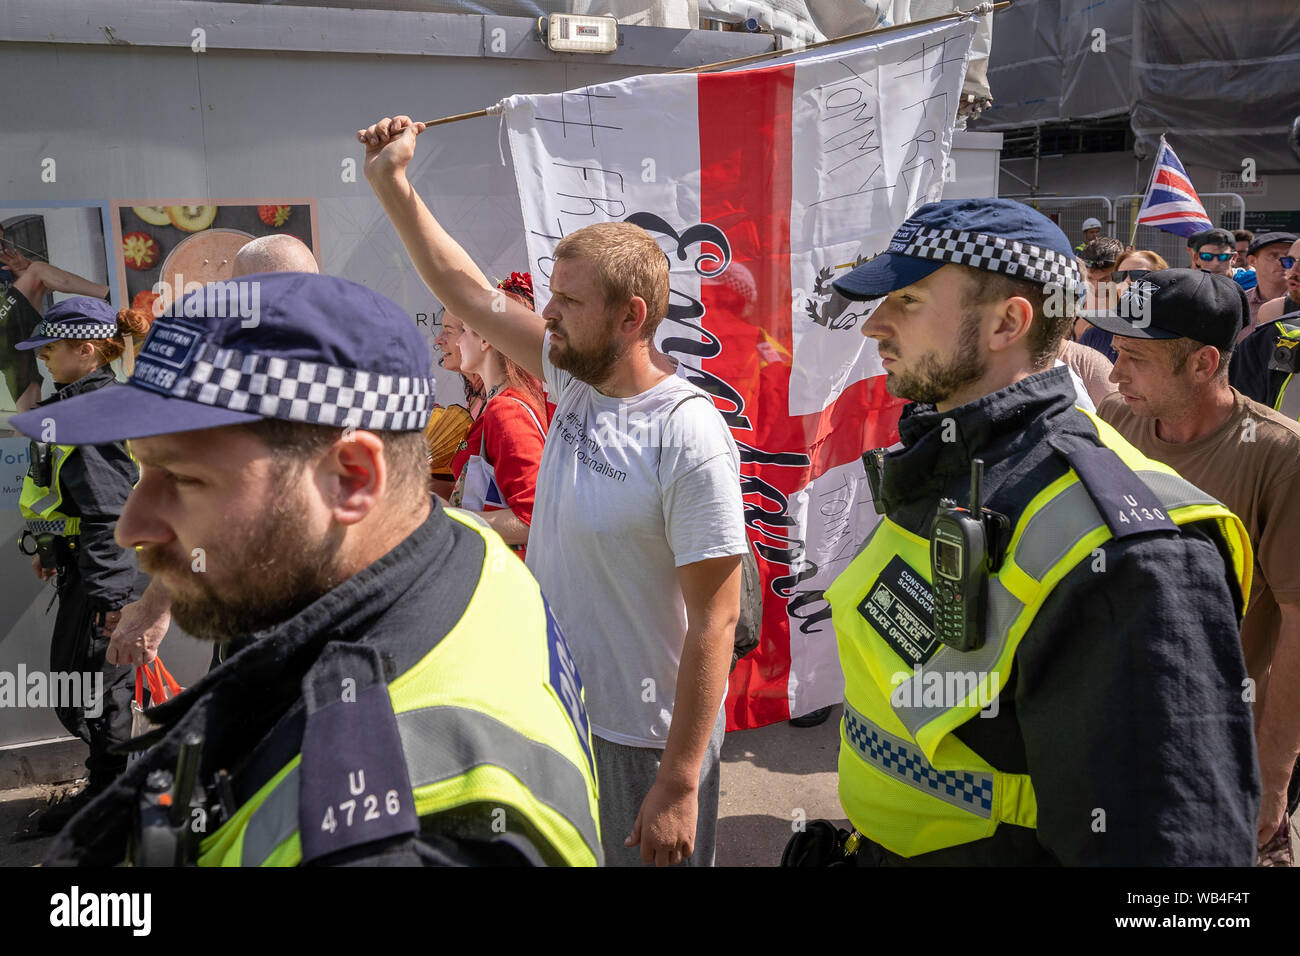 London, UK. 24th August, 2019. 'Free Tommy Robinson' protest outside BBC Broadcasting House. Police make over twenty arrests during a demonstration in support of the jailed Tommy Robinson, real name Stephen Yaxley-Lennon, who was sentenced last month to nine months in prison after being found guilty in contempt of court. Counter-protesters including antifascist activists and the anti-racist group: Stand Up to Racism, opposed the pro-Robinson demonstrators with protest groups kept apart by met police with some clashes. Credit: Guy Corbishley/Alamy Live News Stock Photo